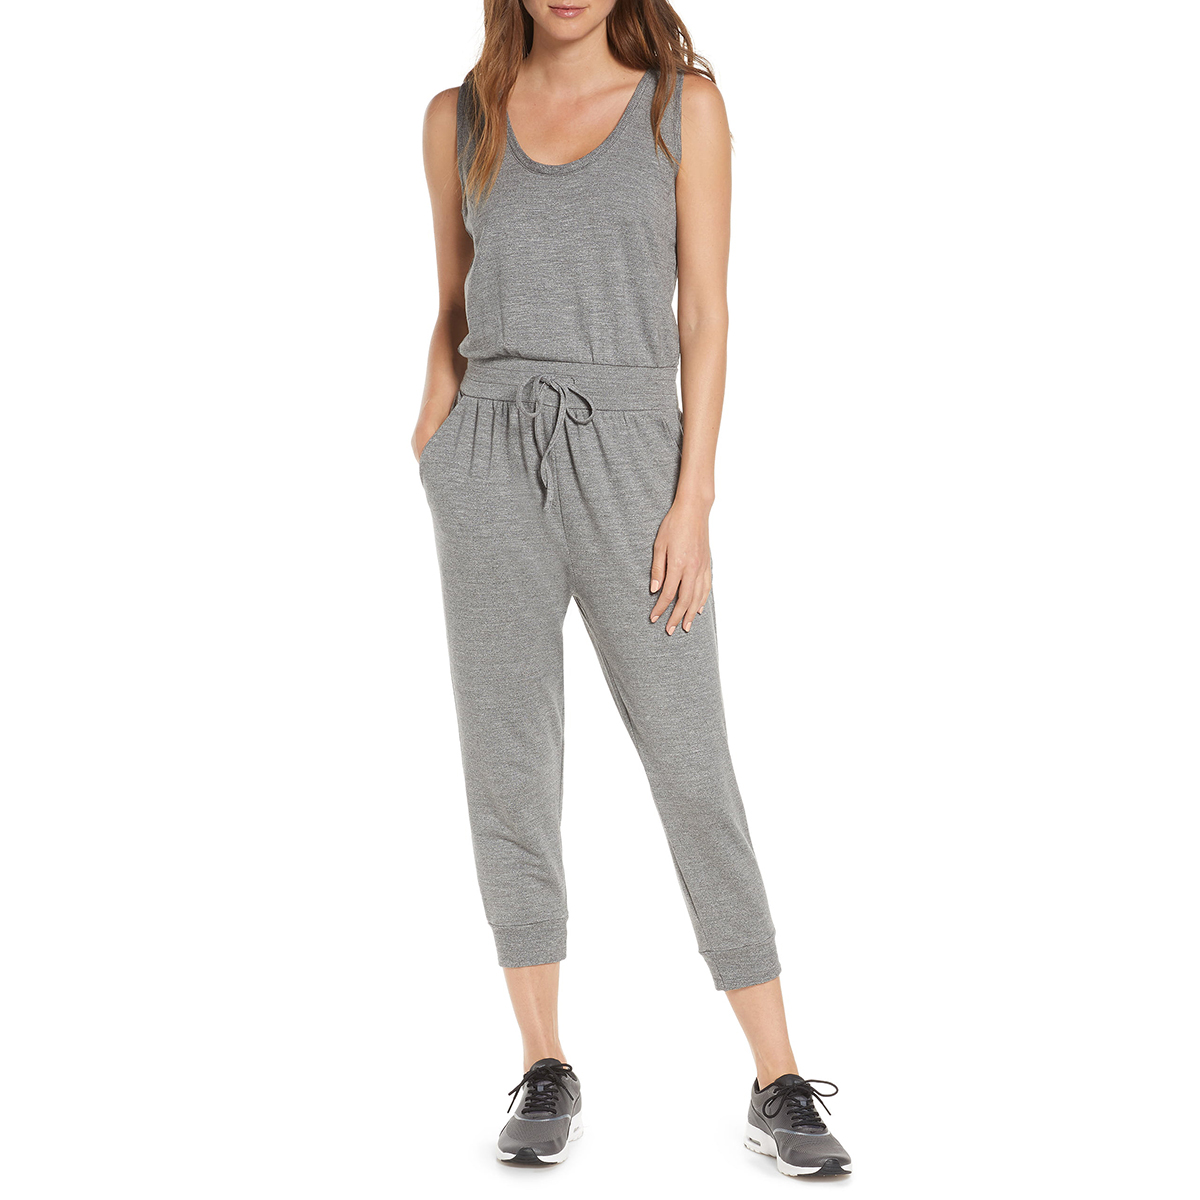 Zella All in One Jumpsuit Is Now 40% Off at Nordstrom